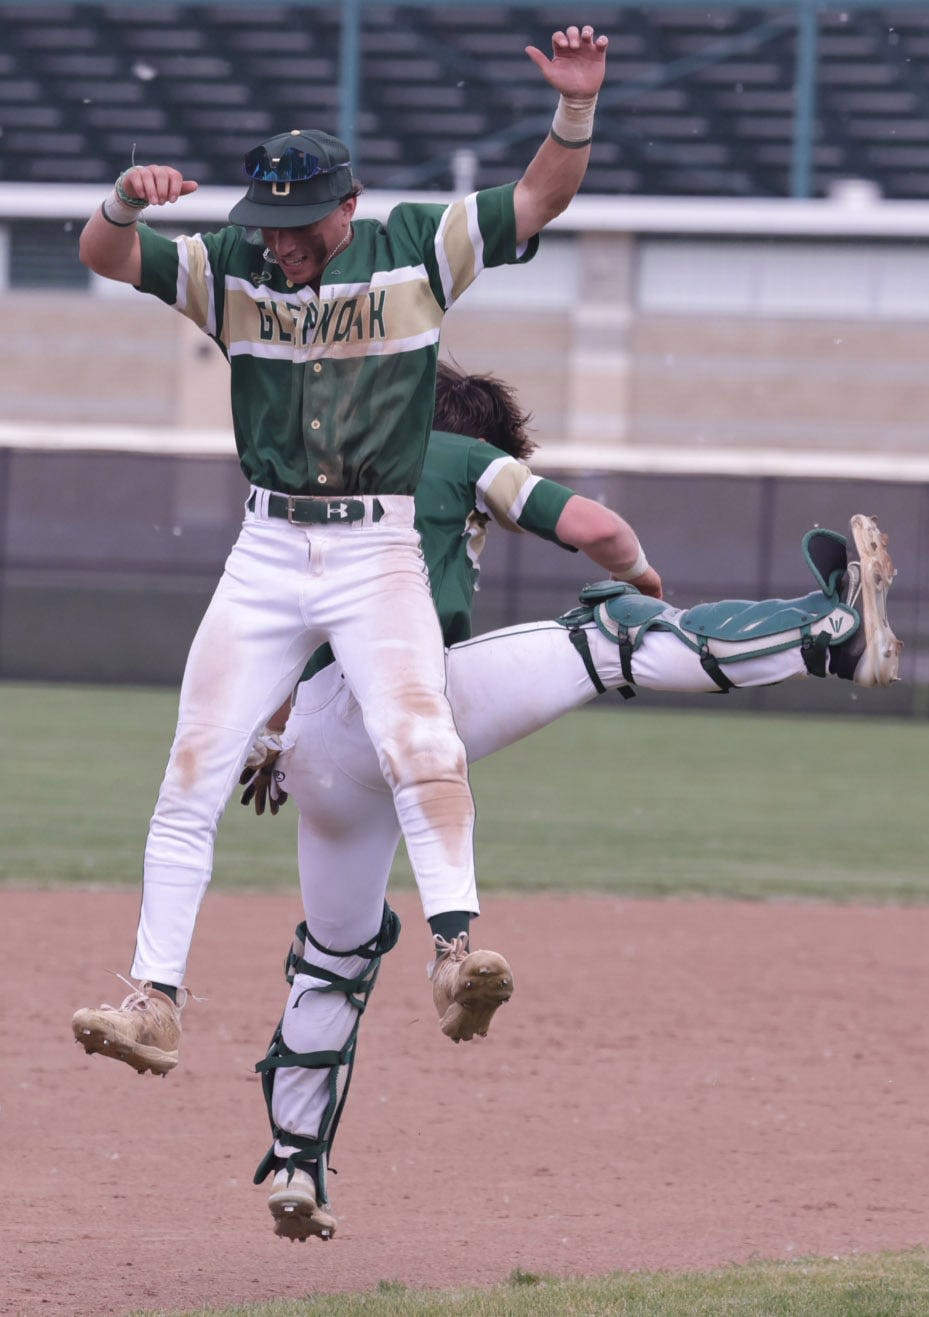 Federal Feud: GlenOak and Jackson to meet in OHSAA baseball district final, key league game